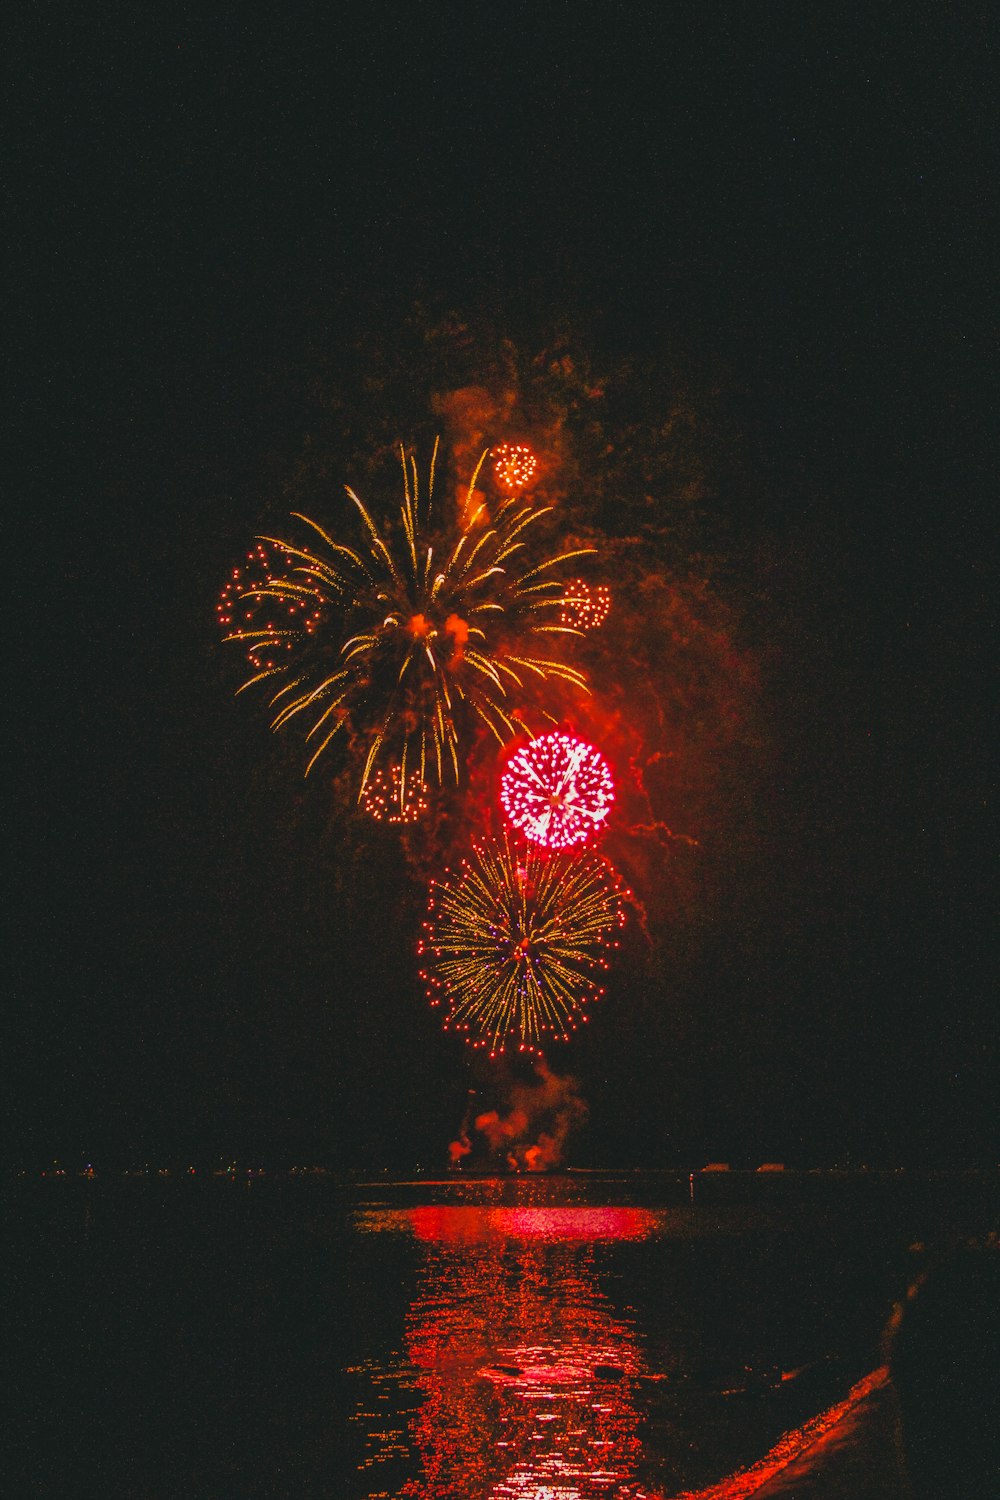 a firework display in the night sky over a body of water